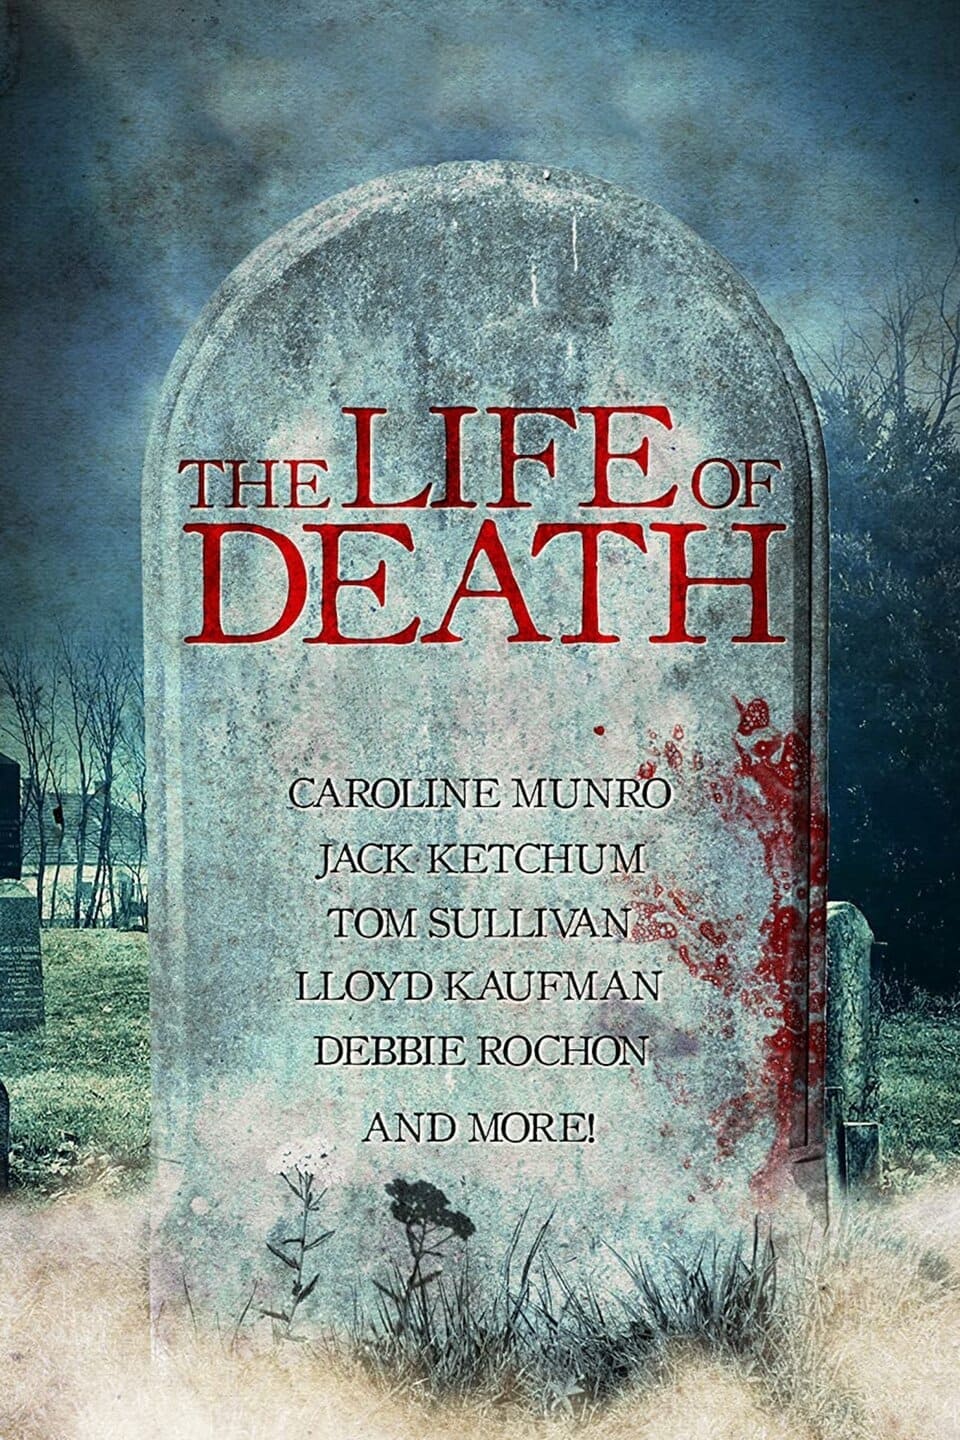 The Life of Death (2015)